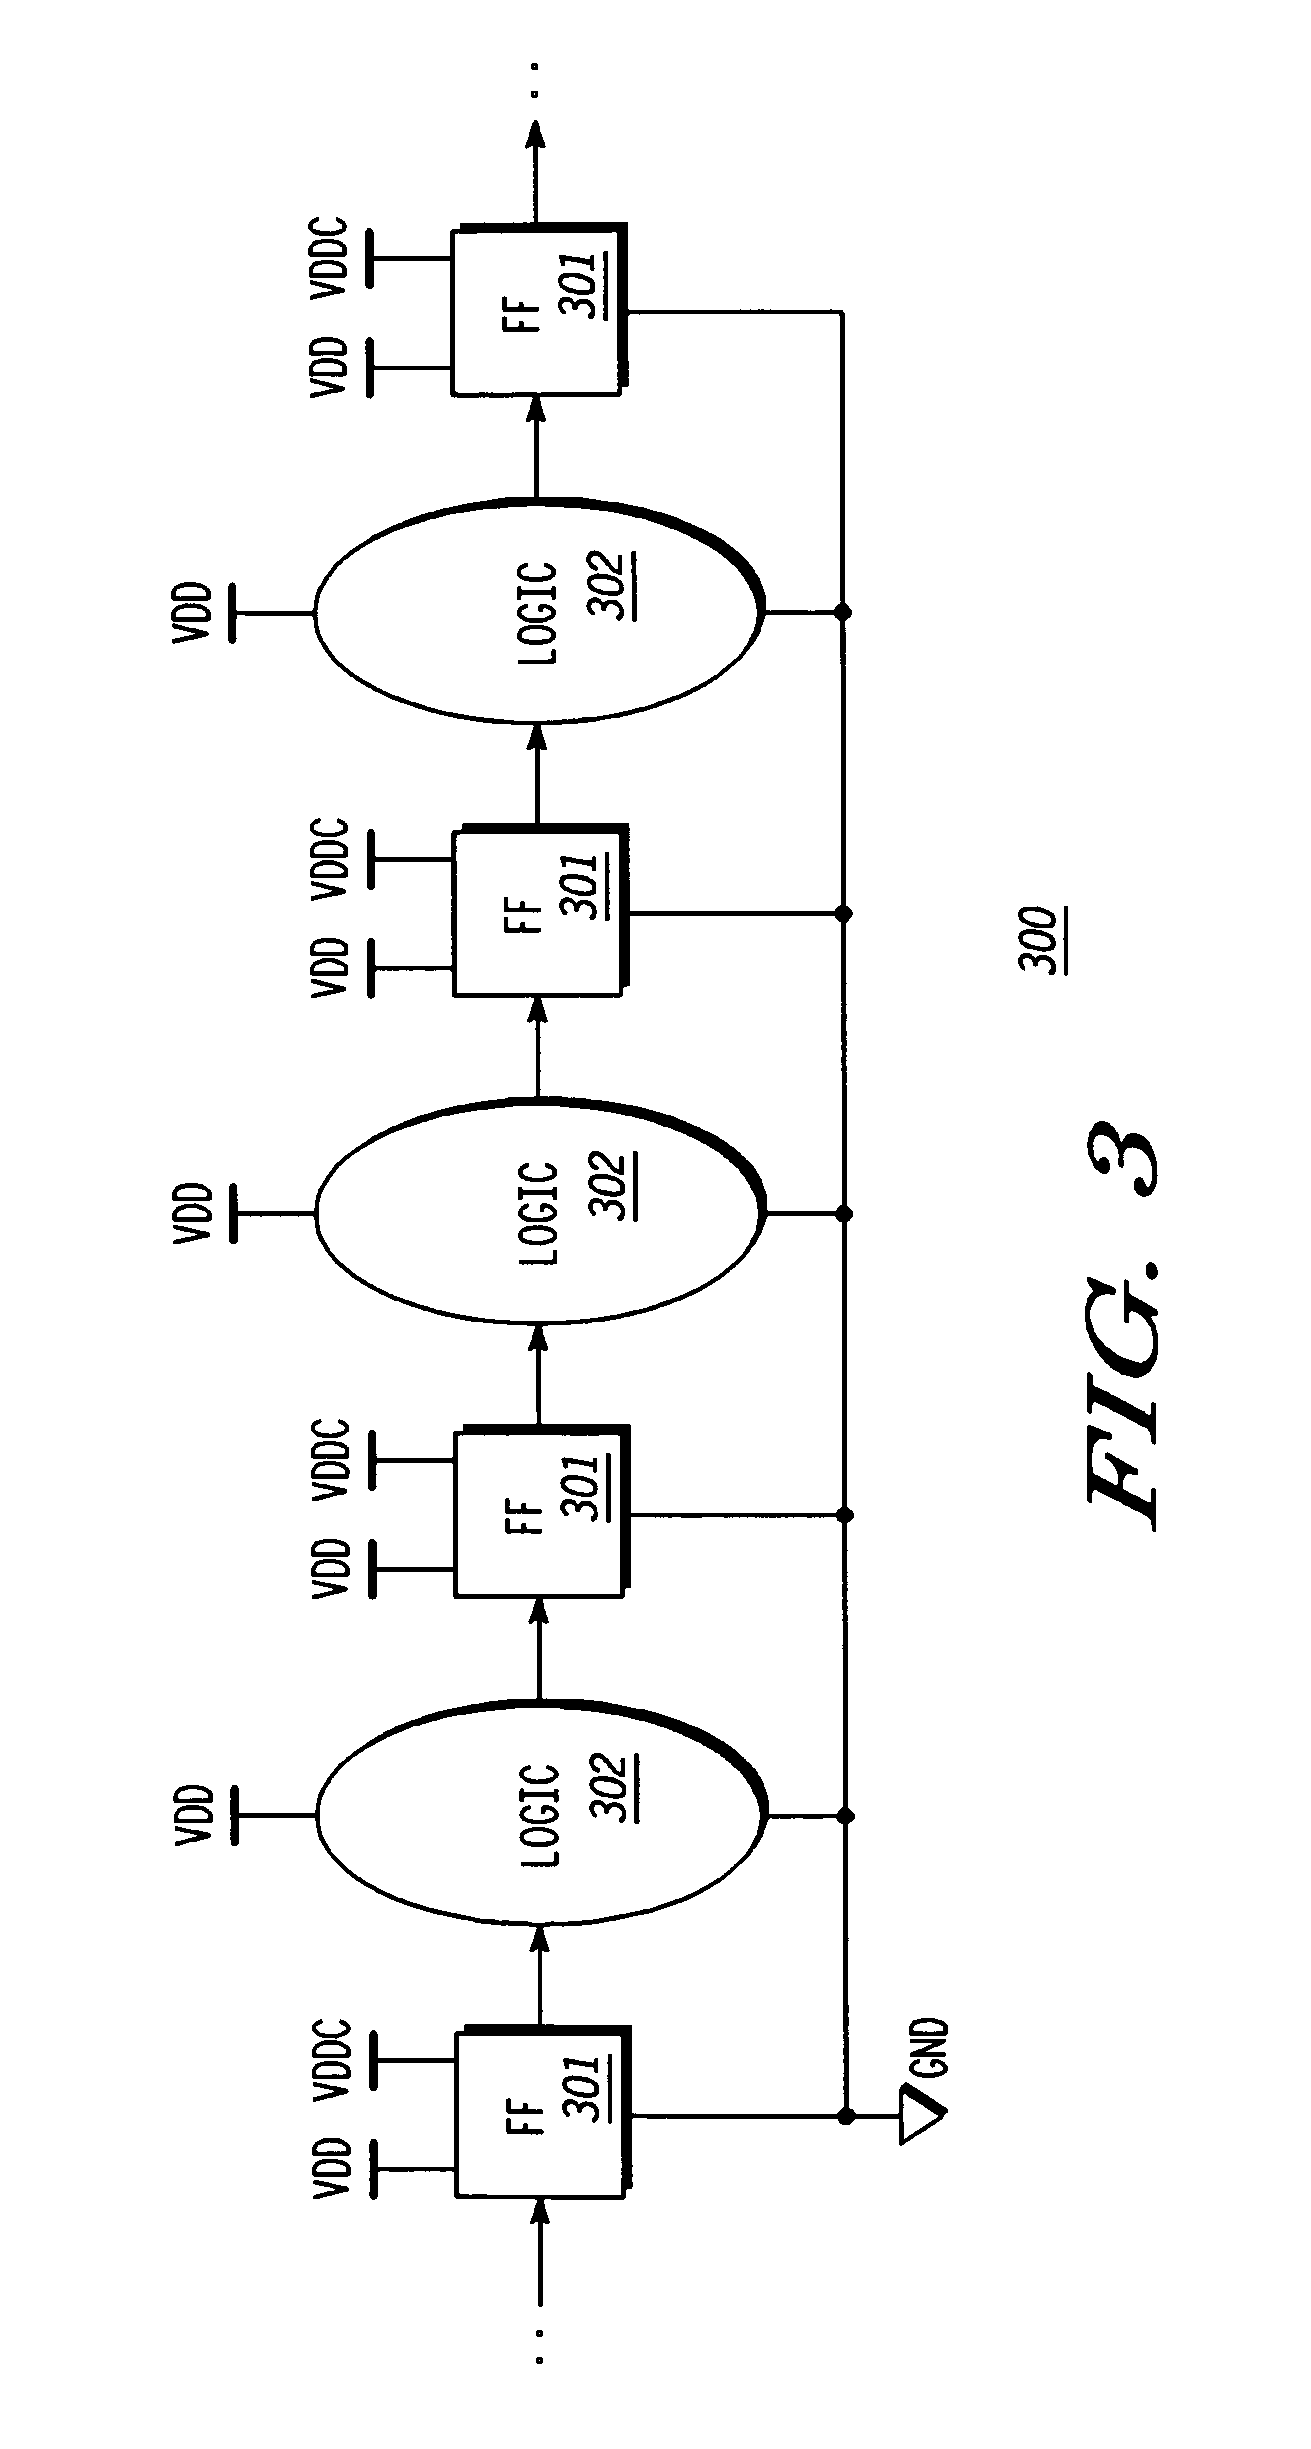 State retention power gating latch circuit